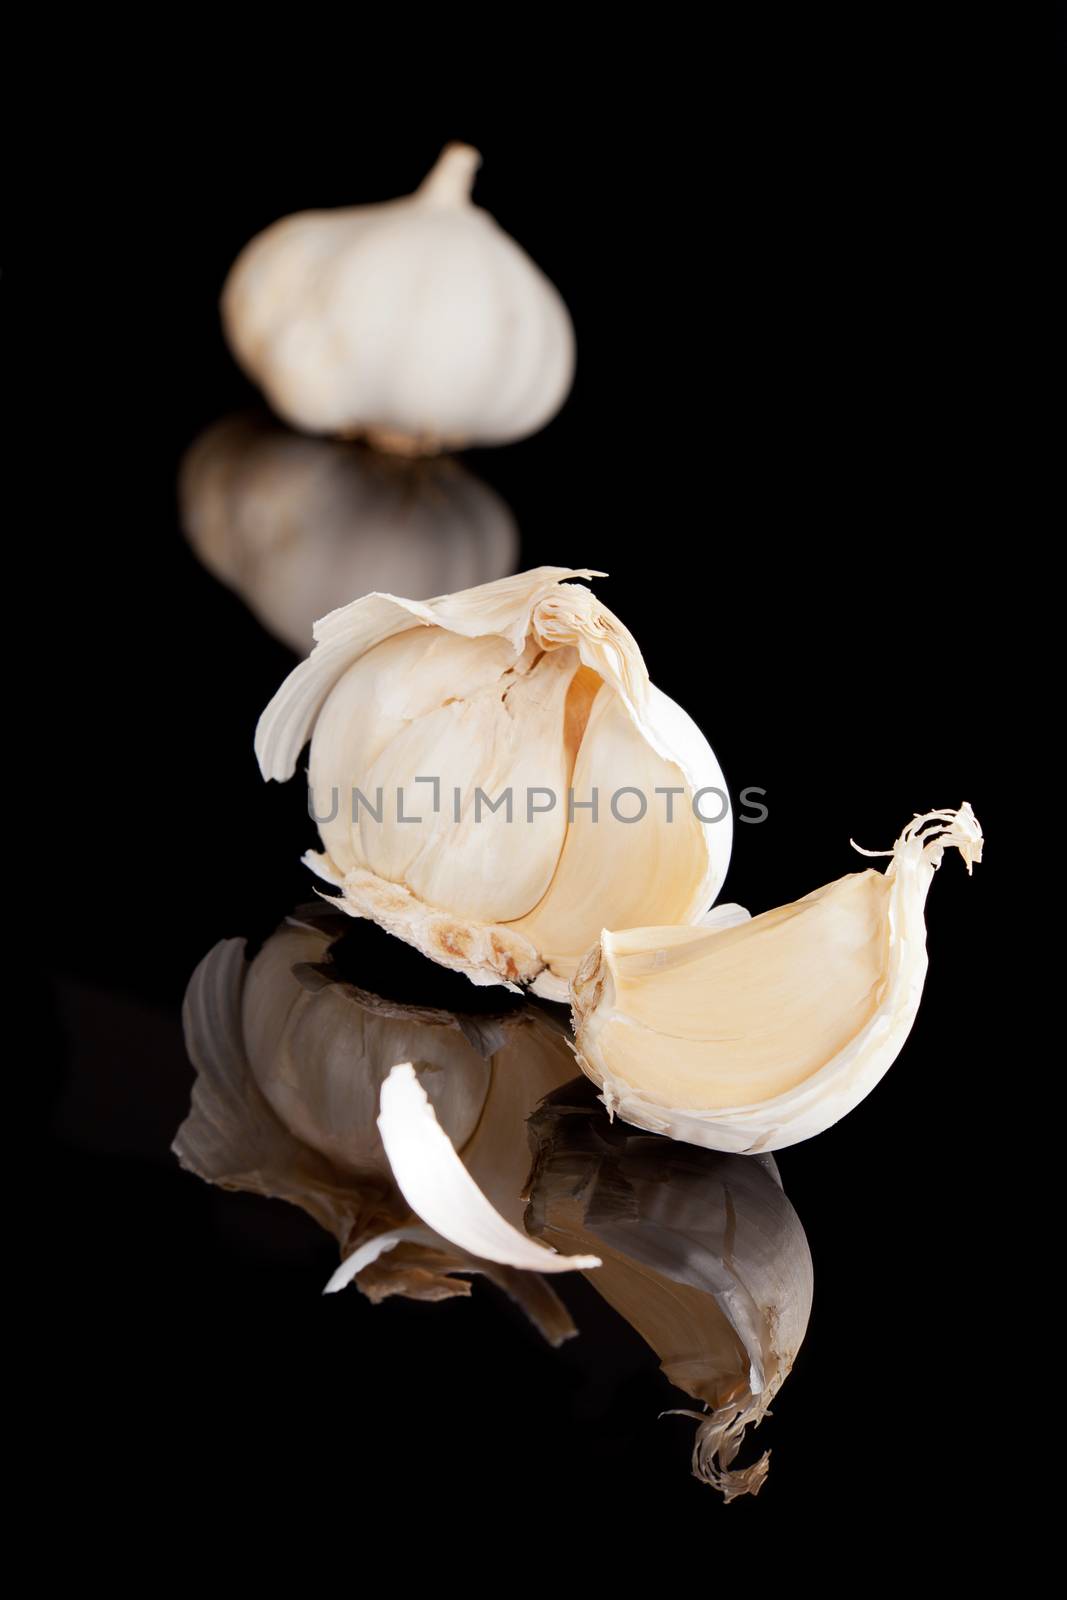 Garlic isolated on black background. Culinary cooking ingredient.